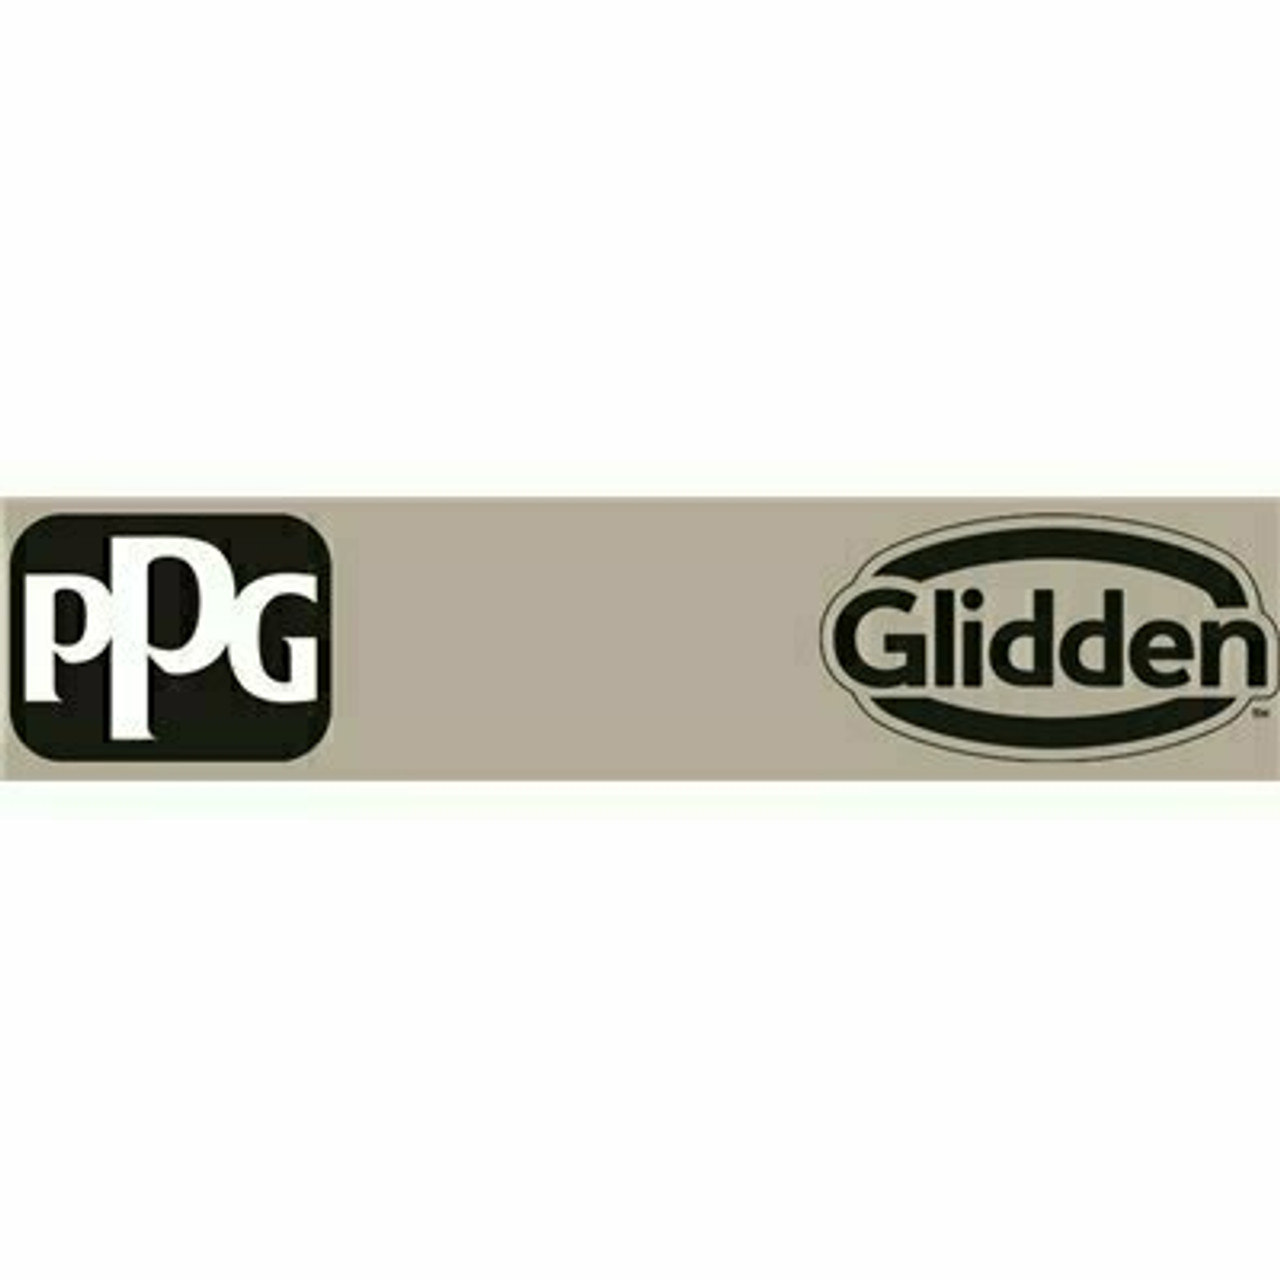 Glidden Diamond 1 Gal. #Ppg1007-4 Hot Stone Flat Interior One-Coat Paint With Primer